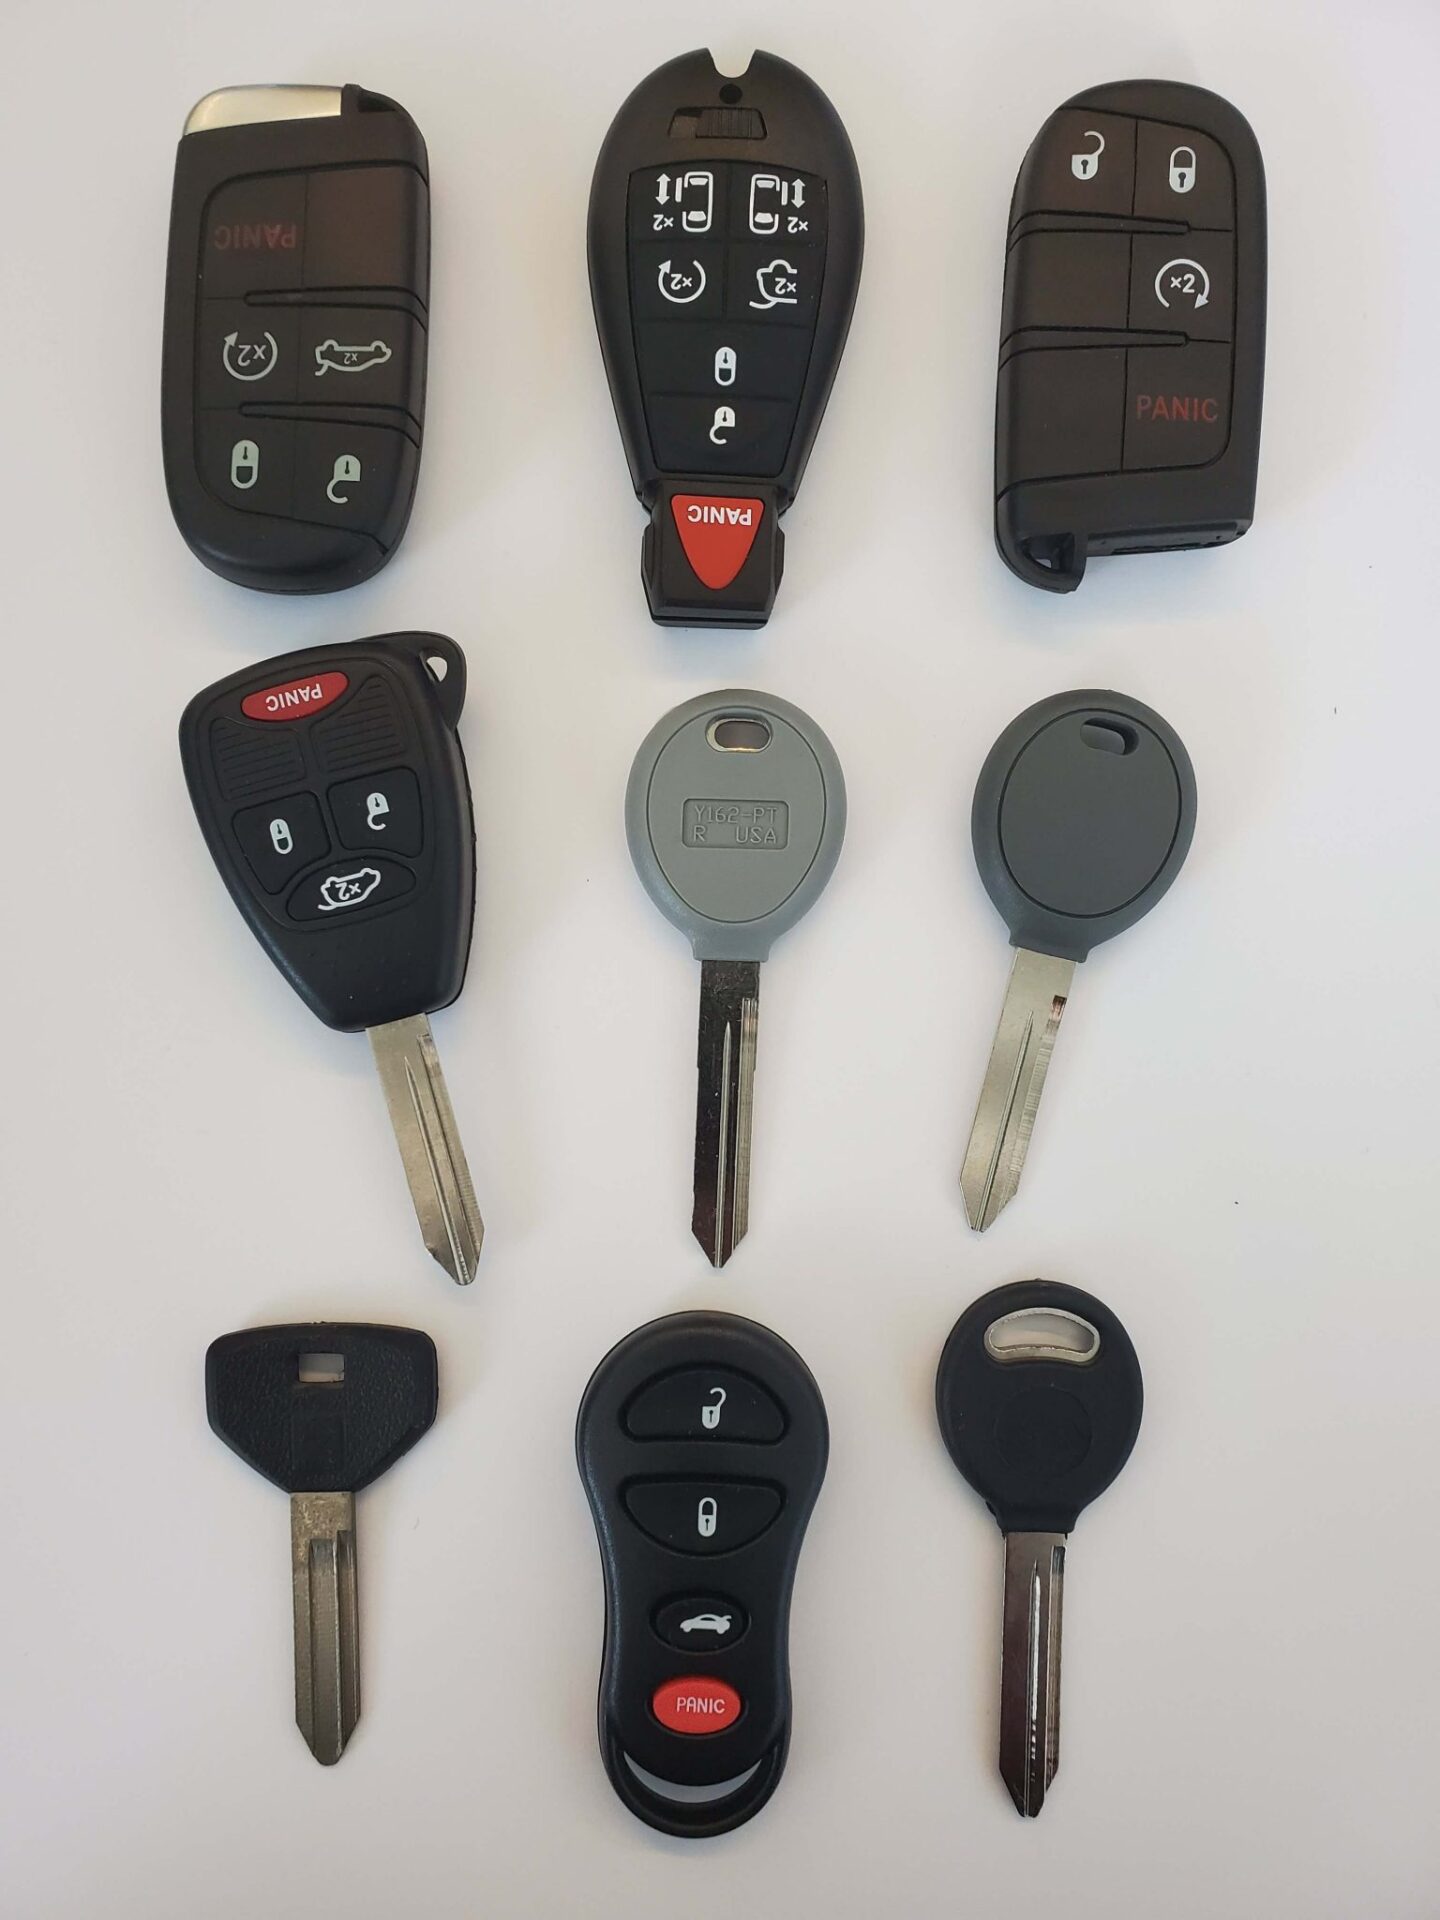 Lost Dodge Keys Replacement - What To Do, Options, Costs, Tips & More